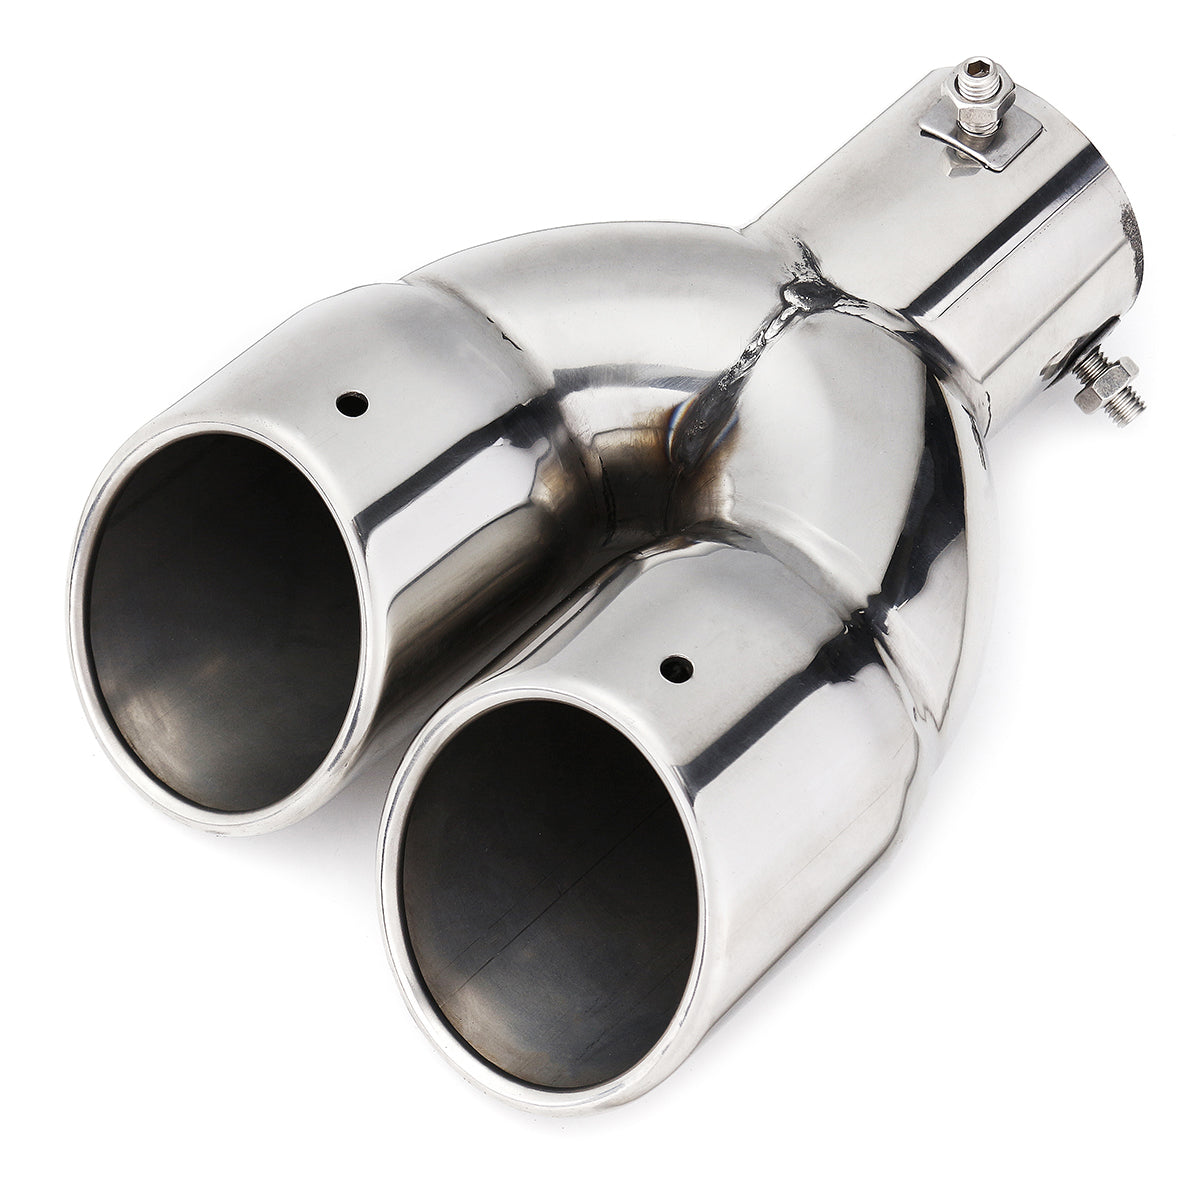 Black Universal Silver Double Outlet Exhaust Muffler Tip End Tail Pipe